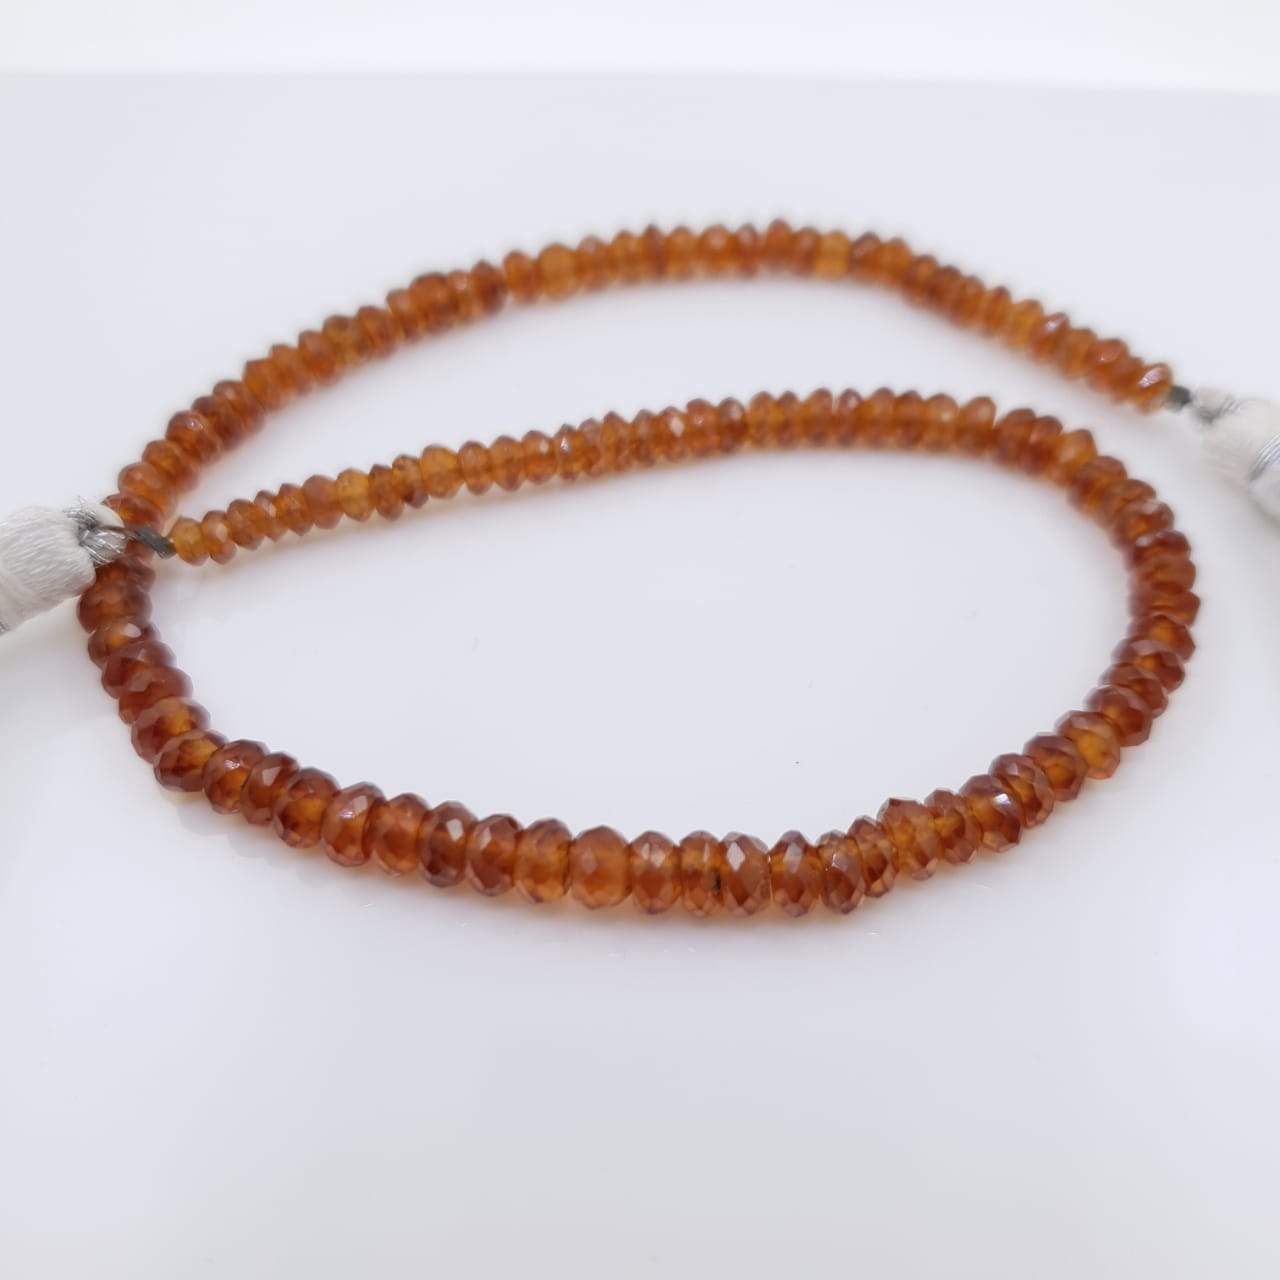 Natural Hessonite Garnets Beads 4mm | Faceted | 9" Inches - The LabradoriteKing